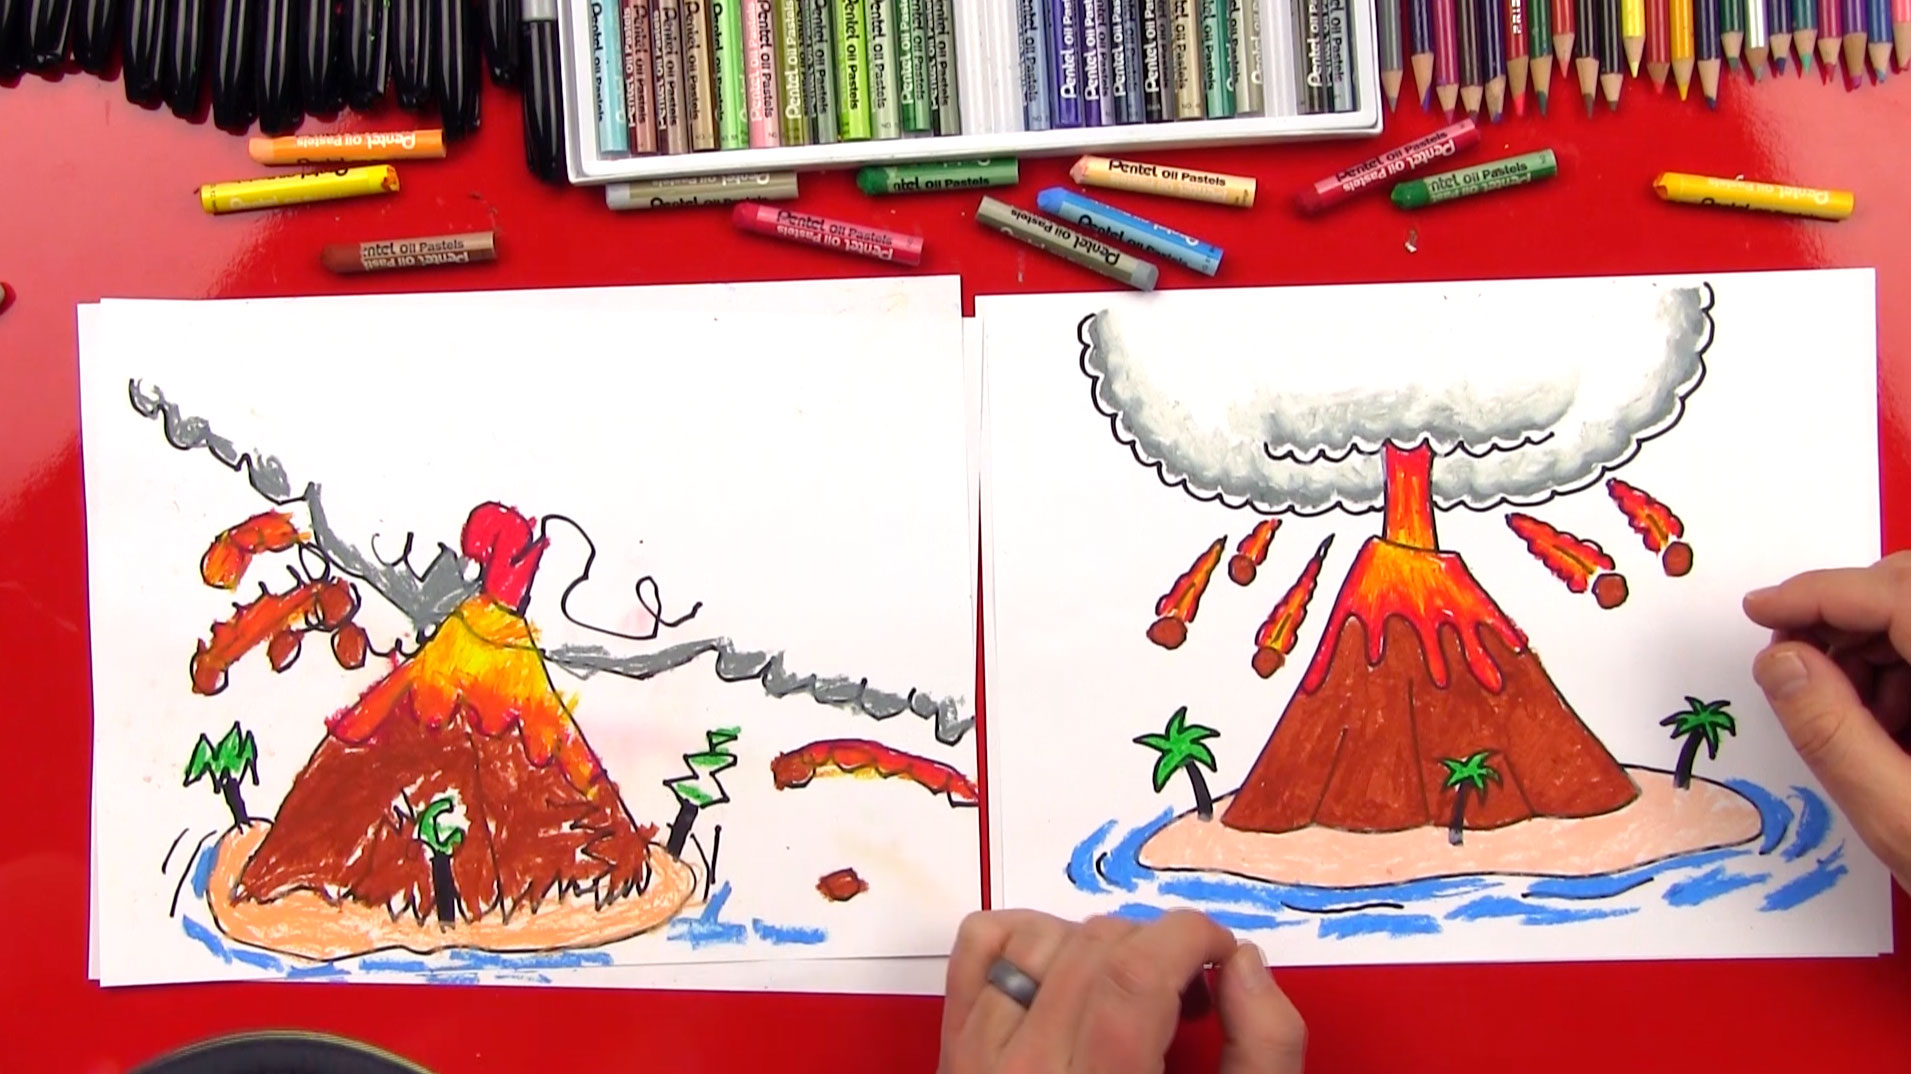 Draw A Volcano - Draw Spaces